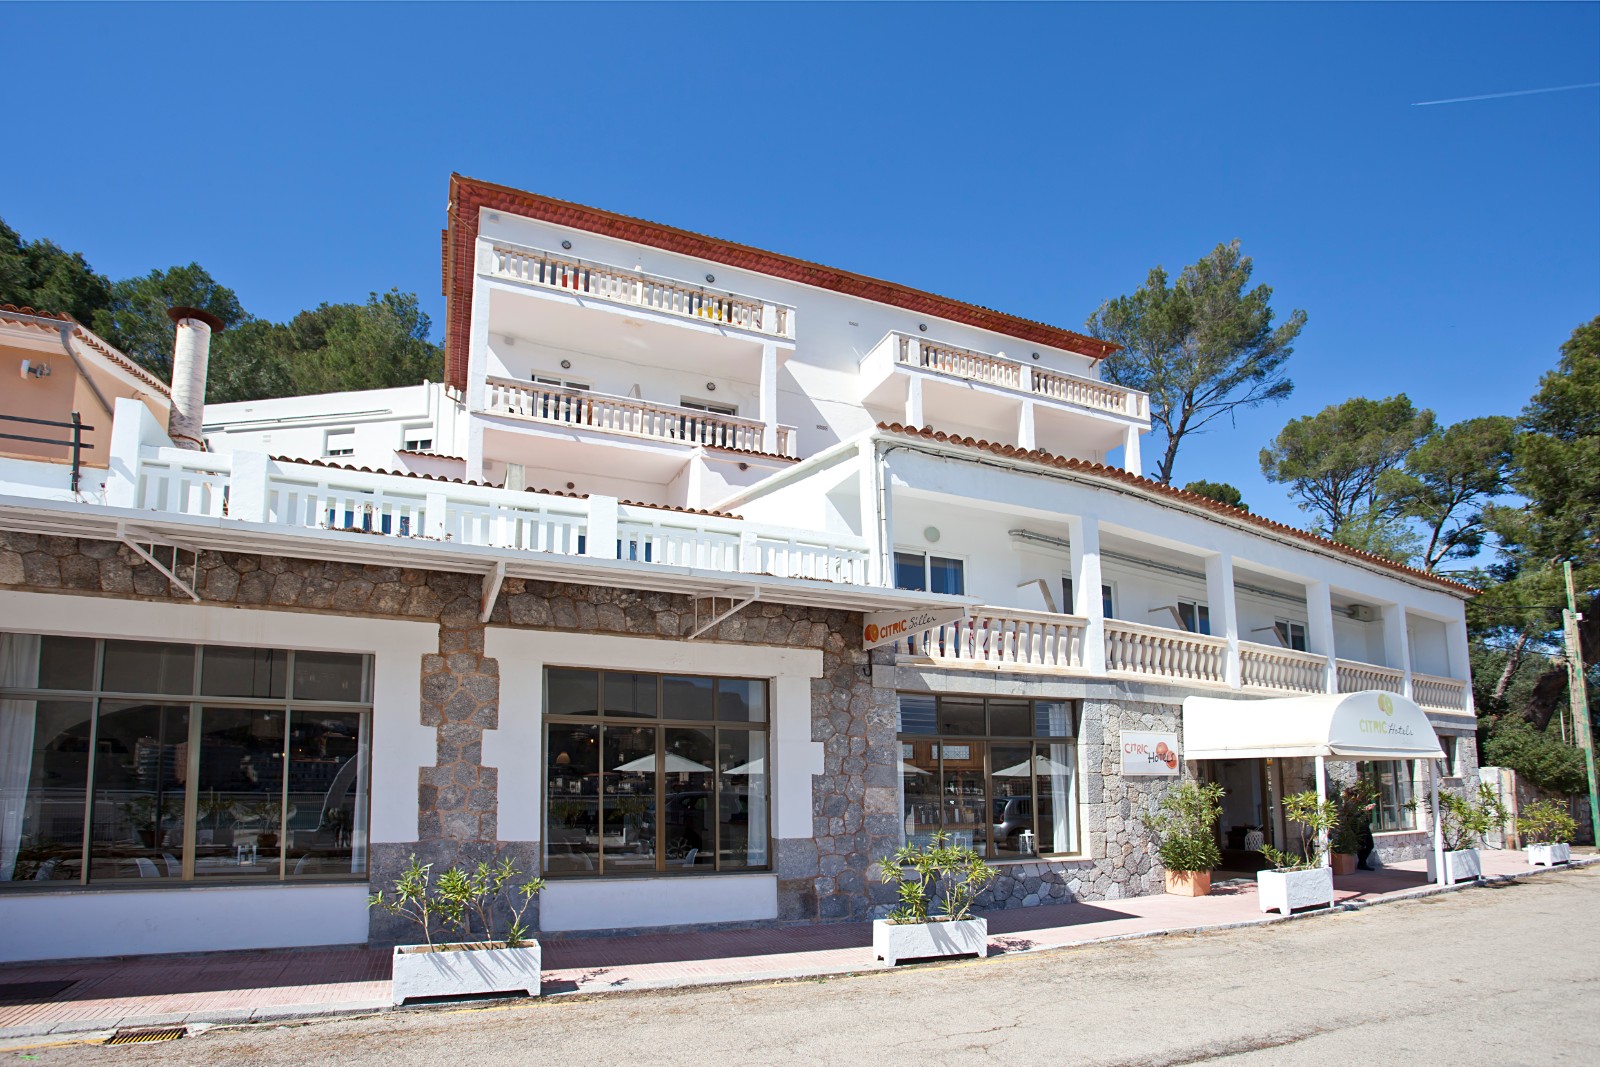 Citric Hotel Soller Front View